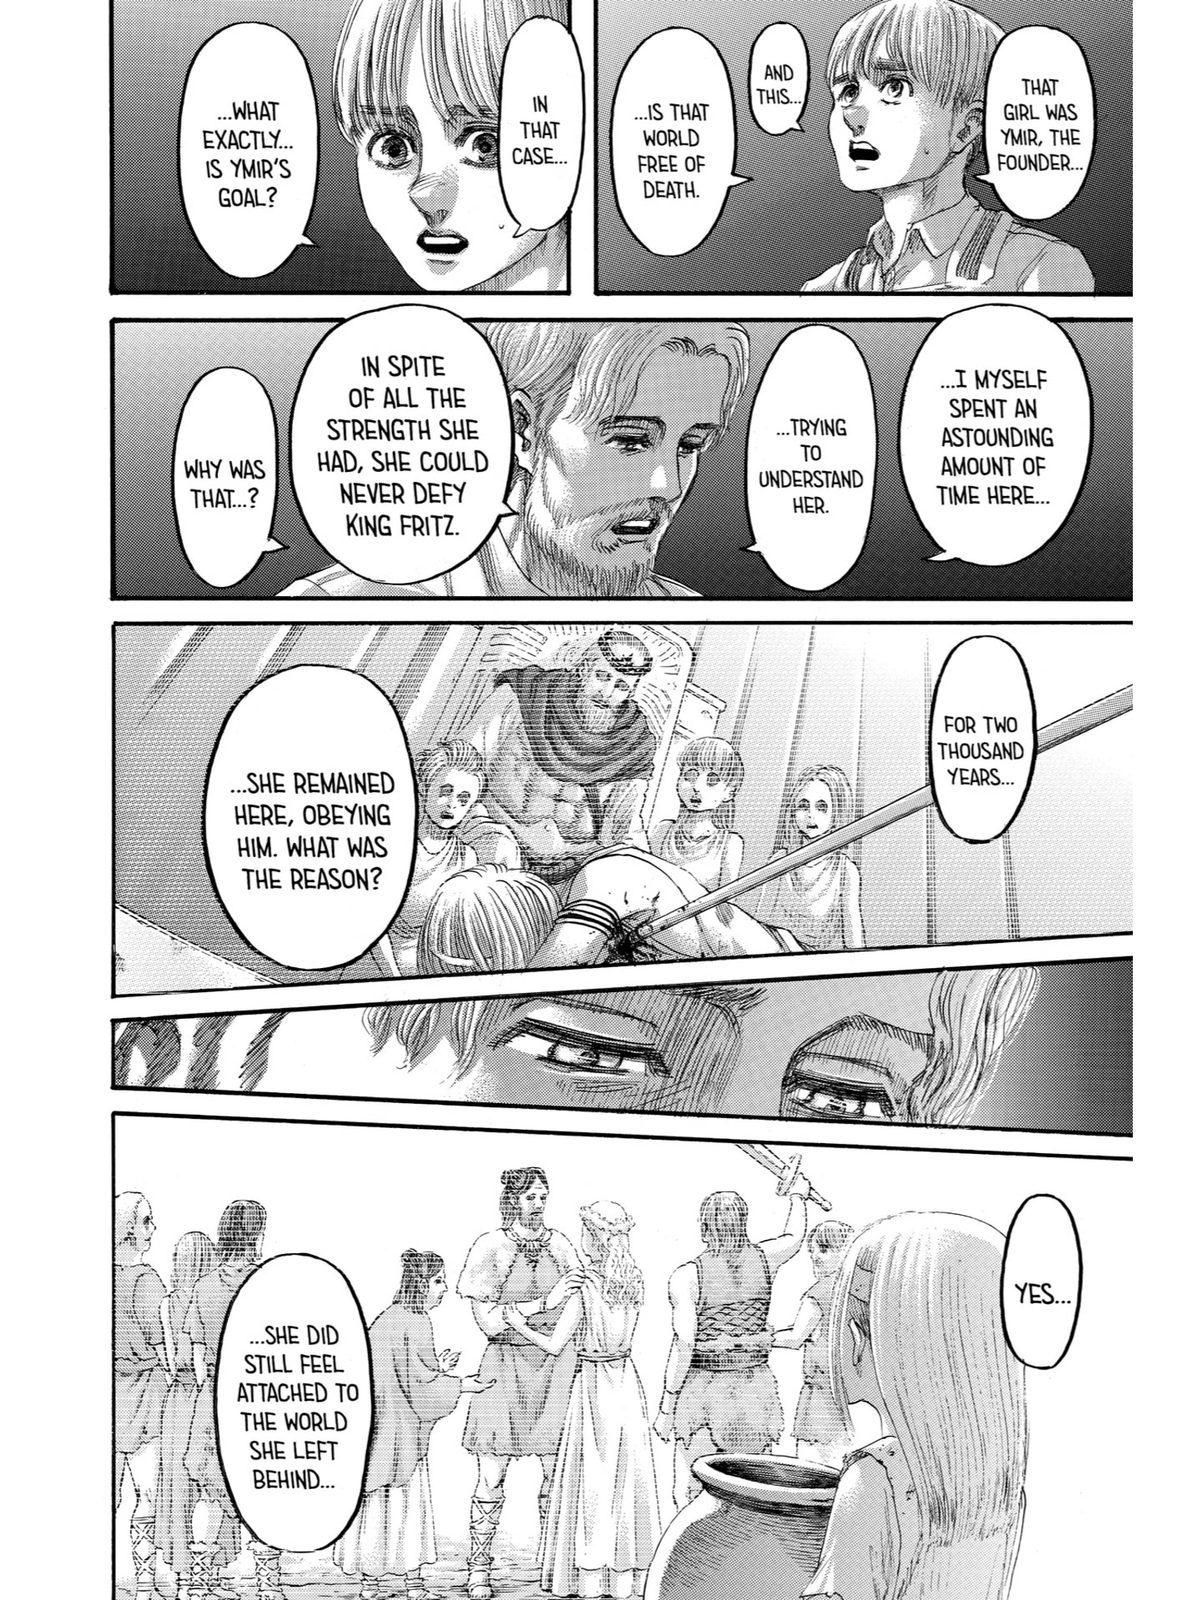 Attack on Titan was a Twisted Love Story All Along